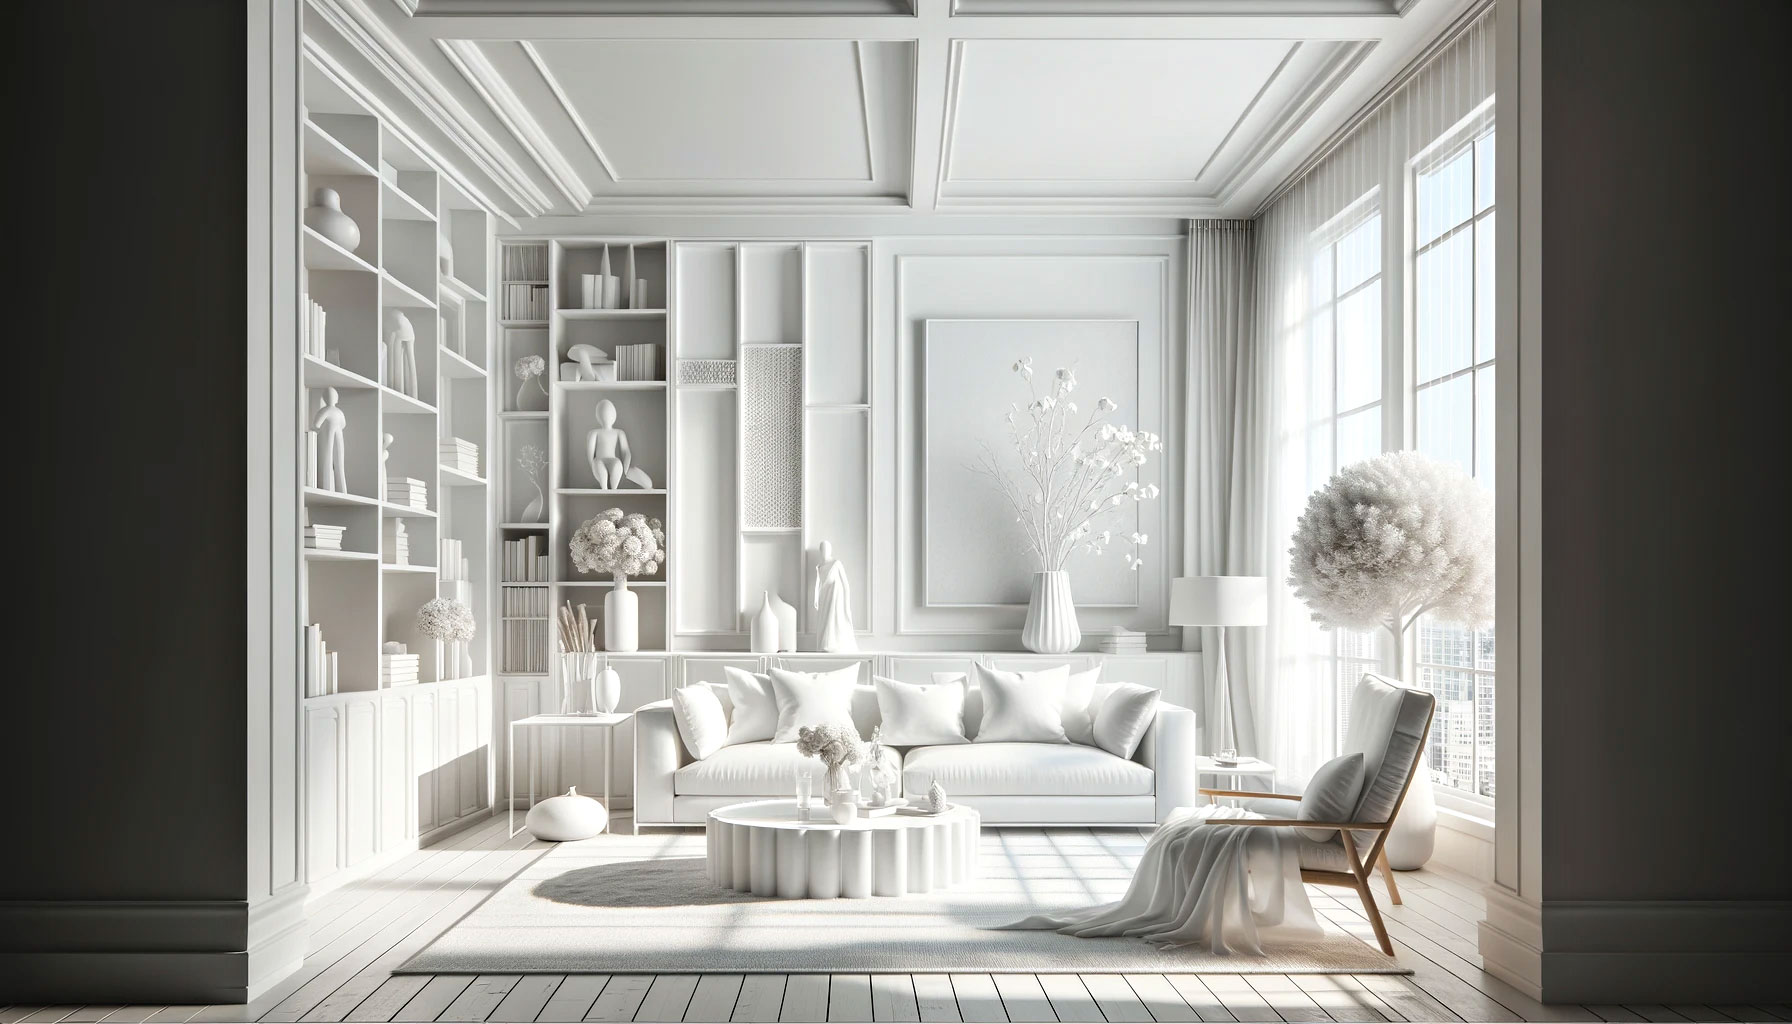 The Colour Psychology of White in Interior Design